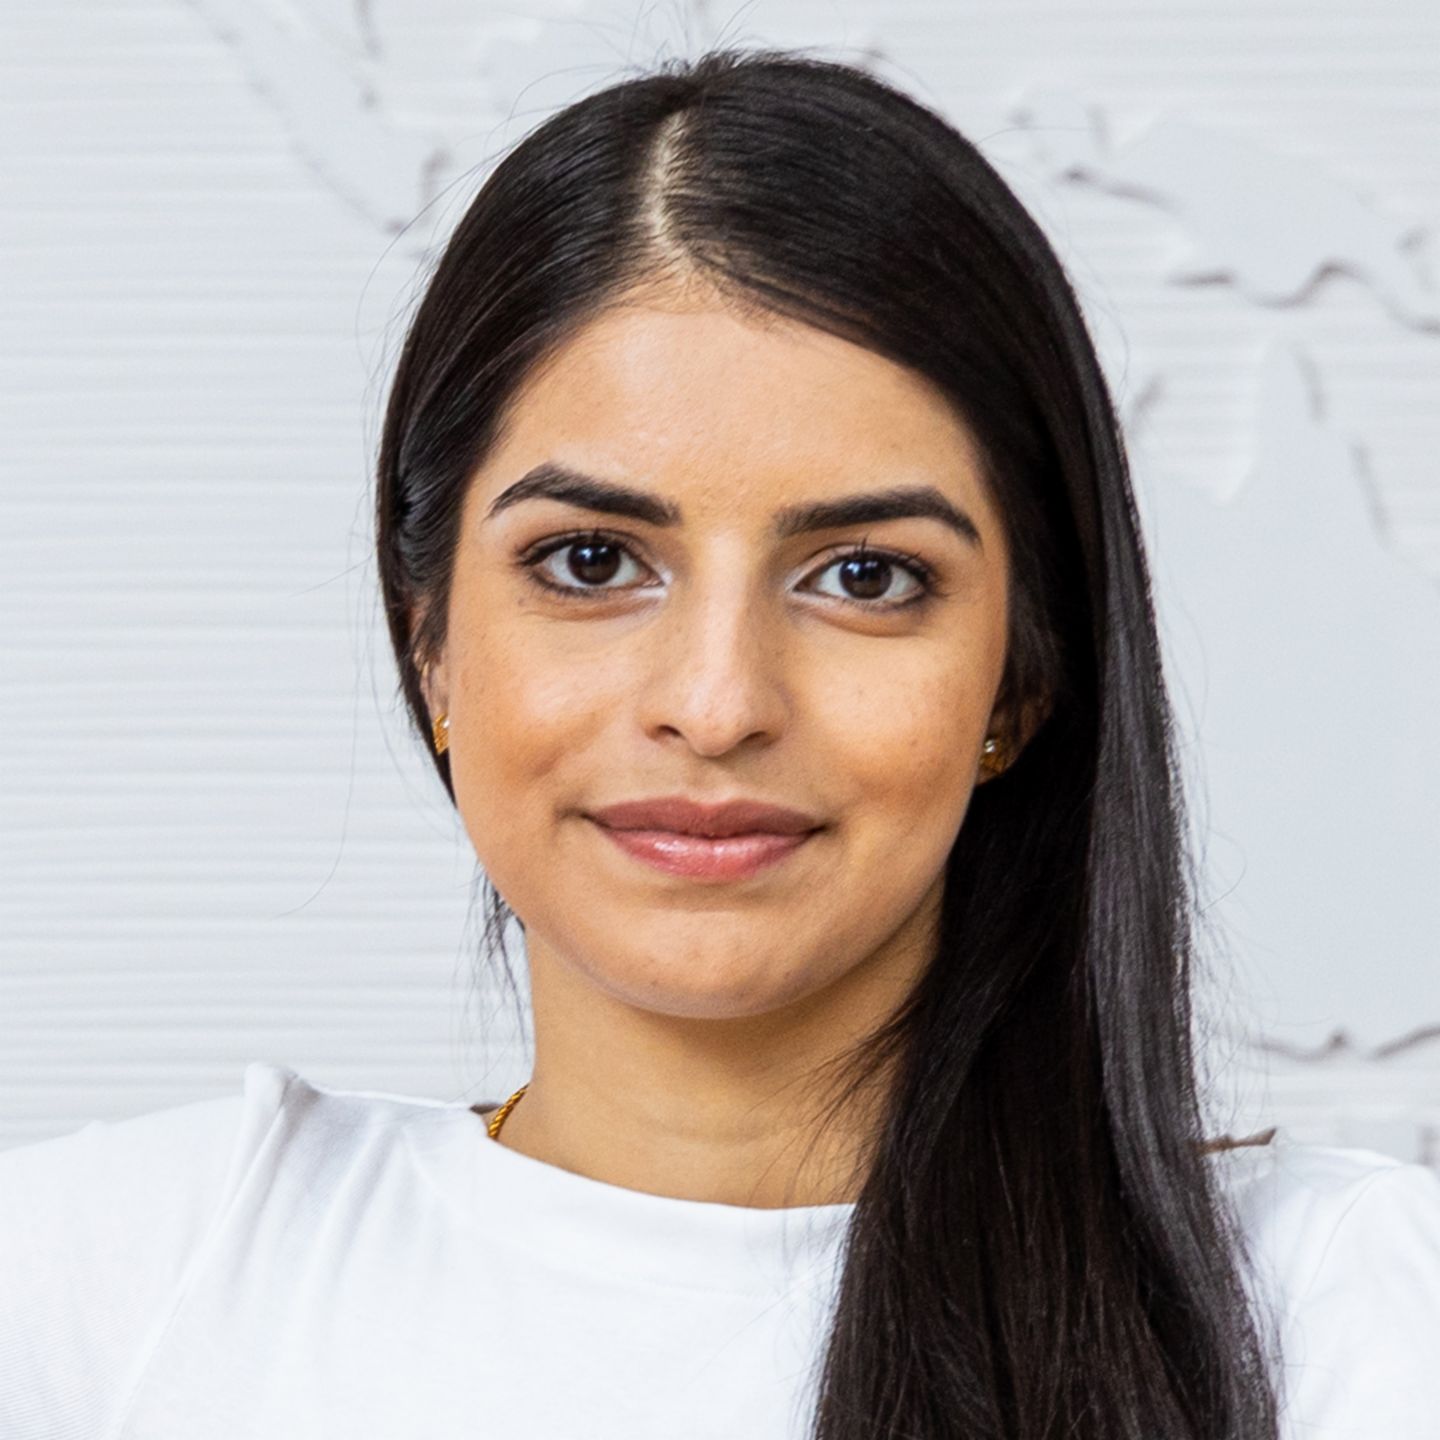 EOS in the UN Global Compact: Alisha Kumar, Junior Corporate Compliance Officer at the EOS Group